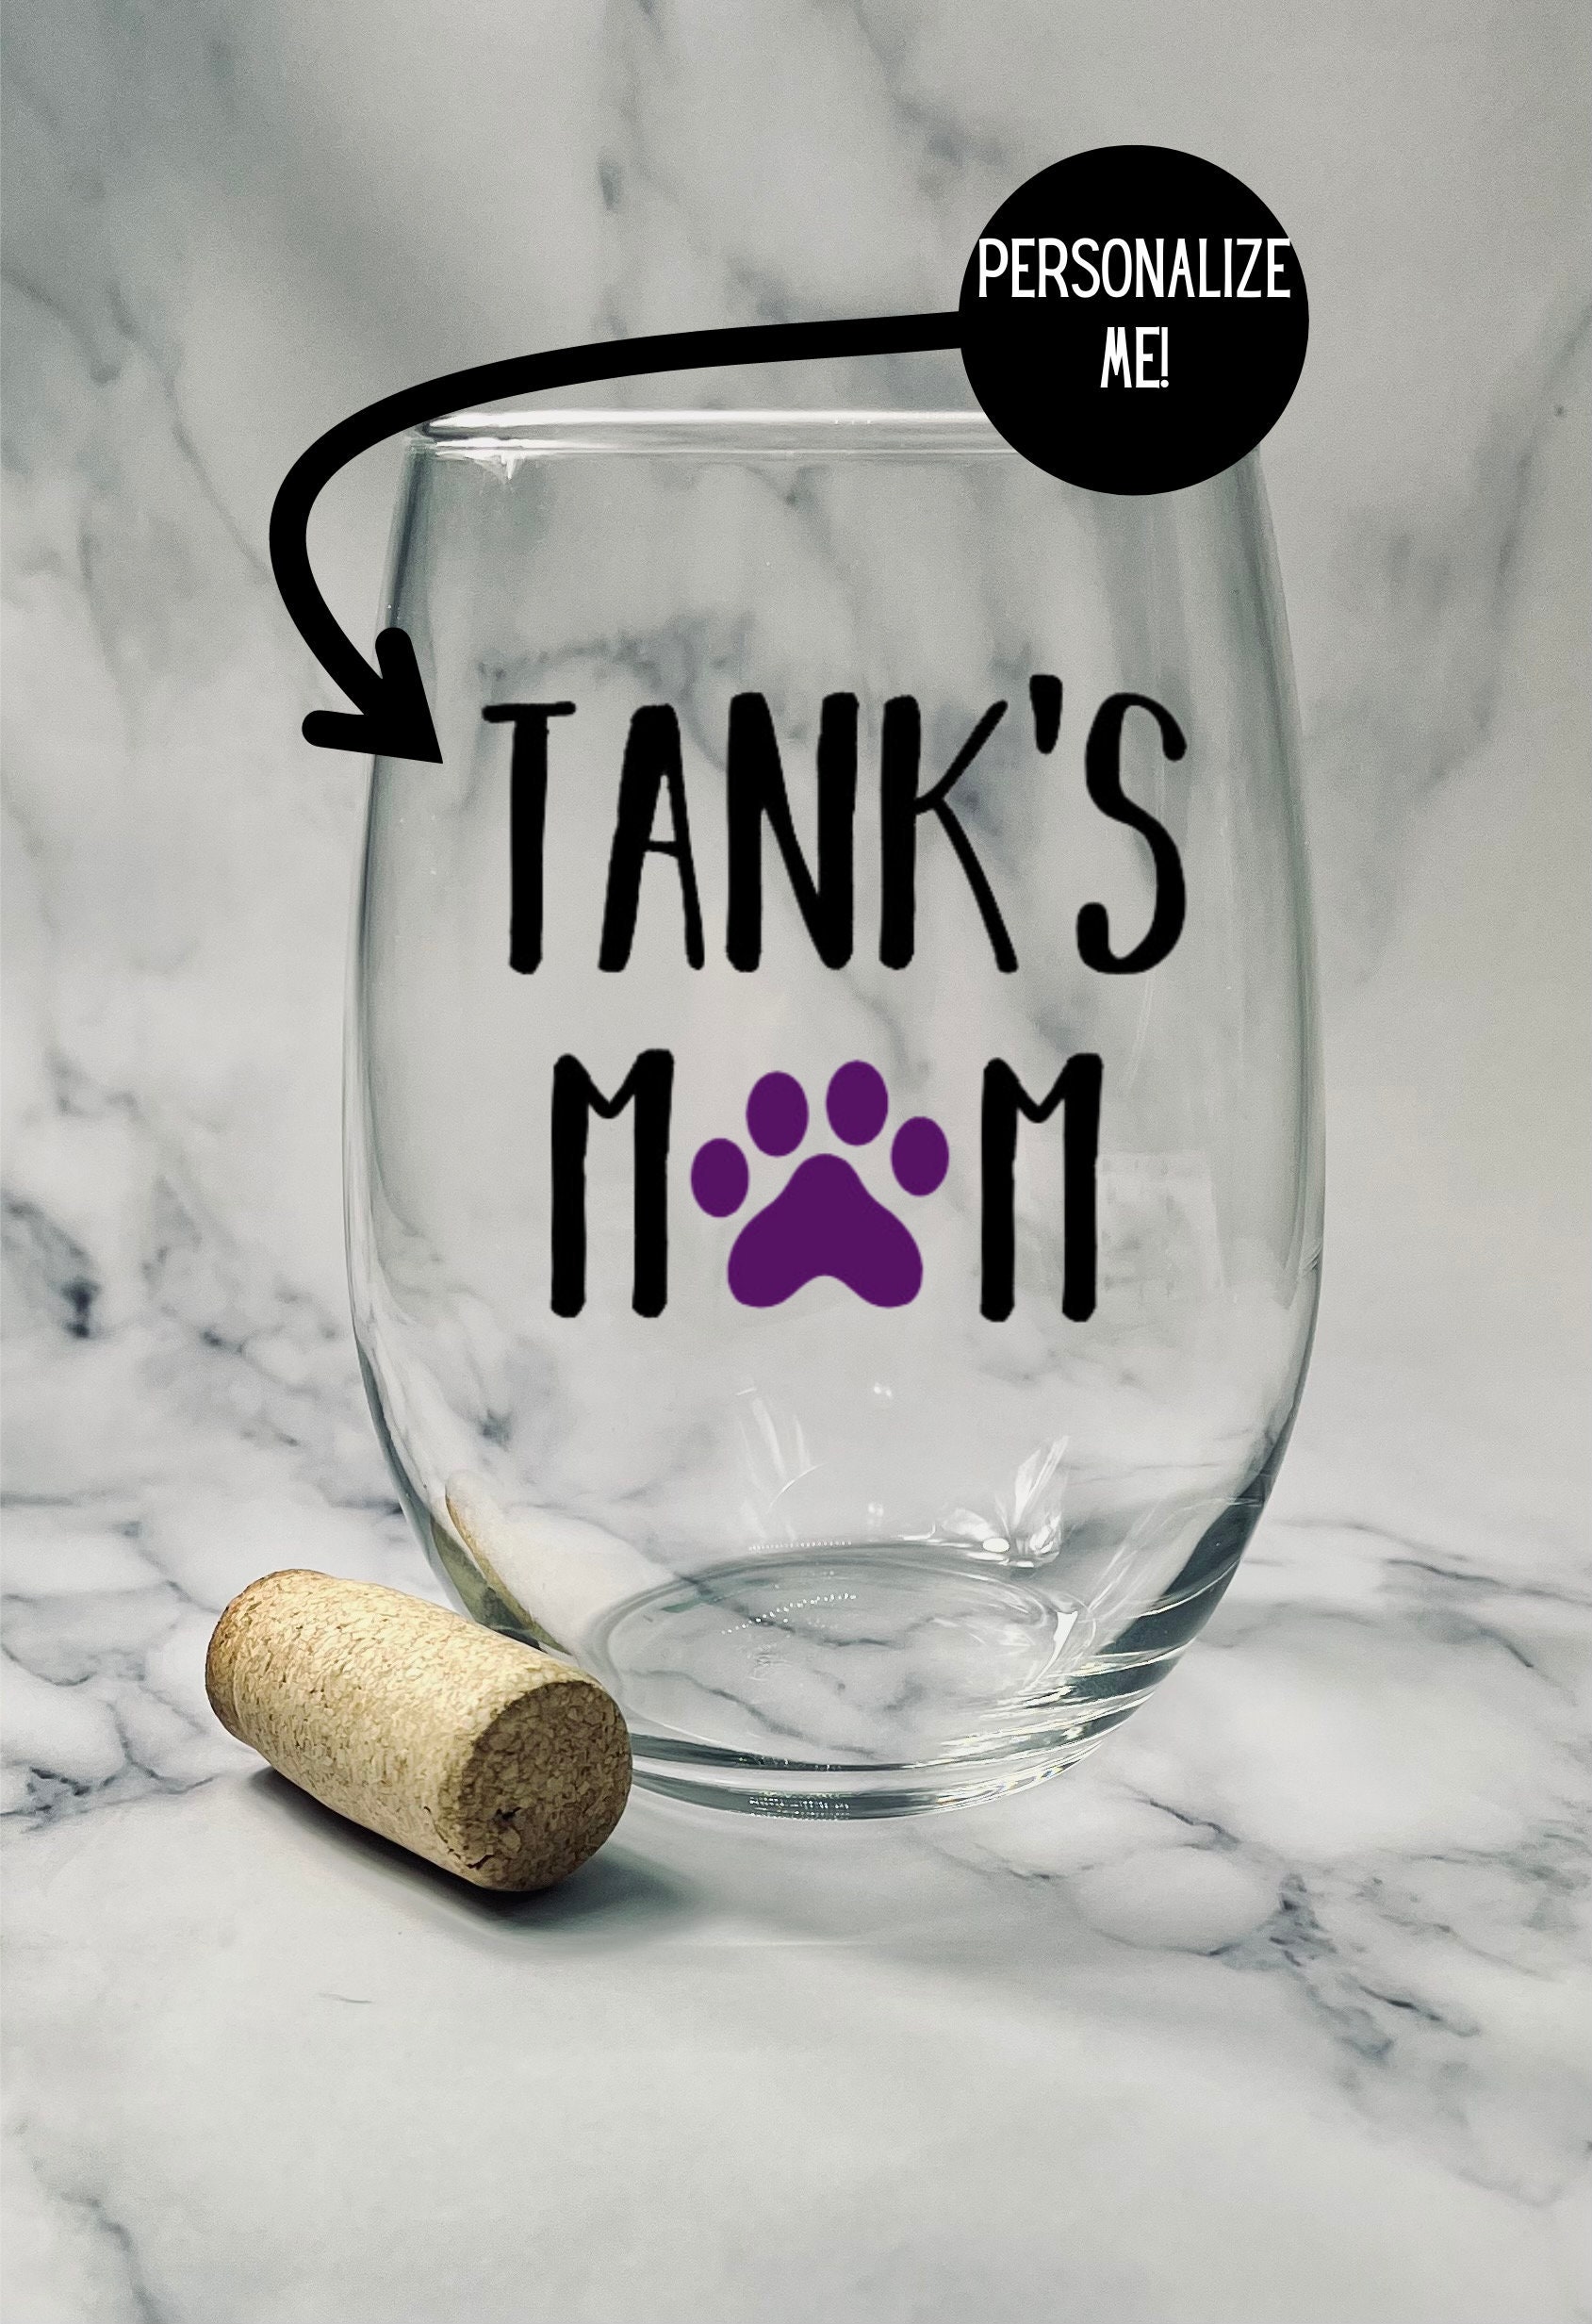 50th Birthday Gifts for Mum, Women, Wife, Wine Tumbler with Funny Saying,12  oz Insulated Stemless Wine Glasses with Angel Favor Keychain, Funny Wine  Gift Set for Wine, Champagne, Coffee 